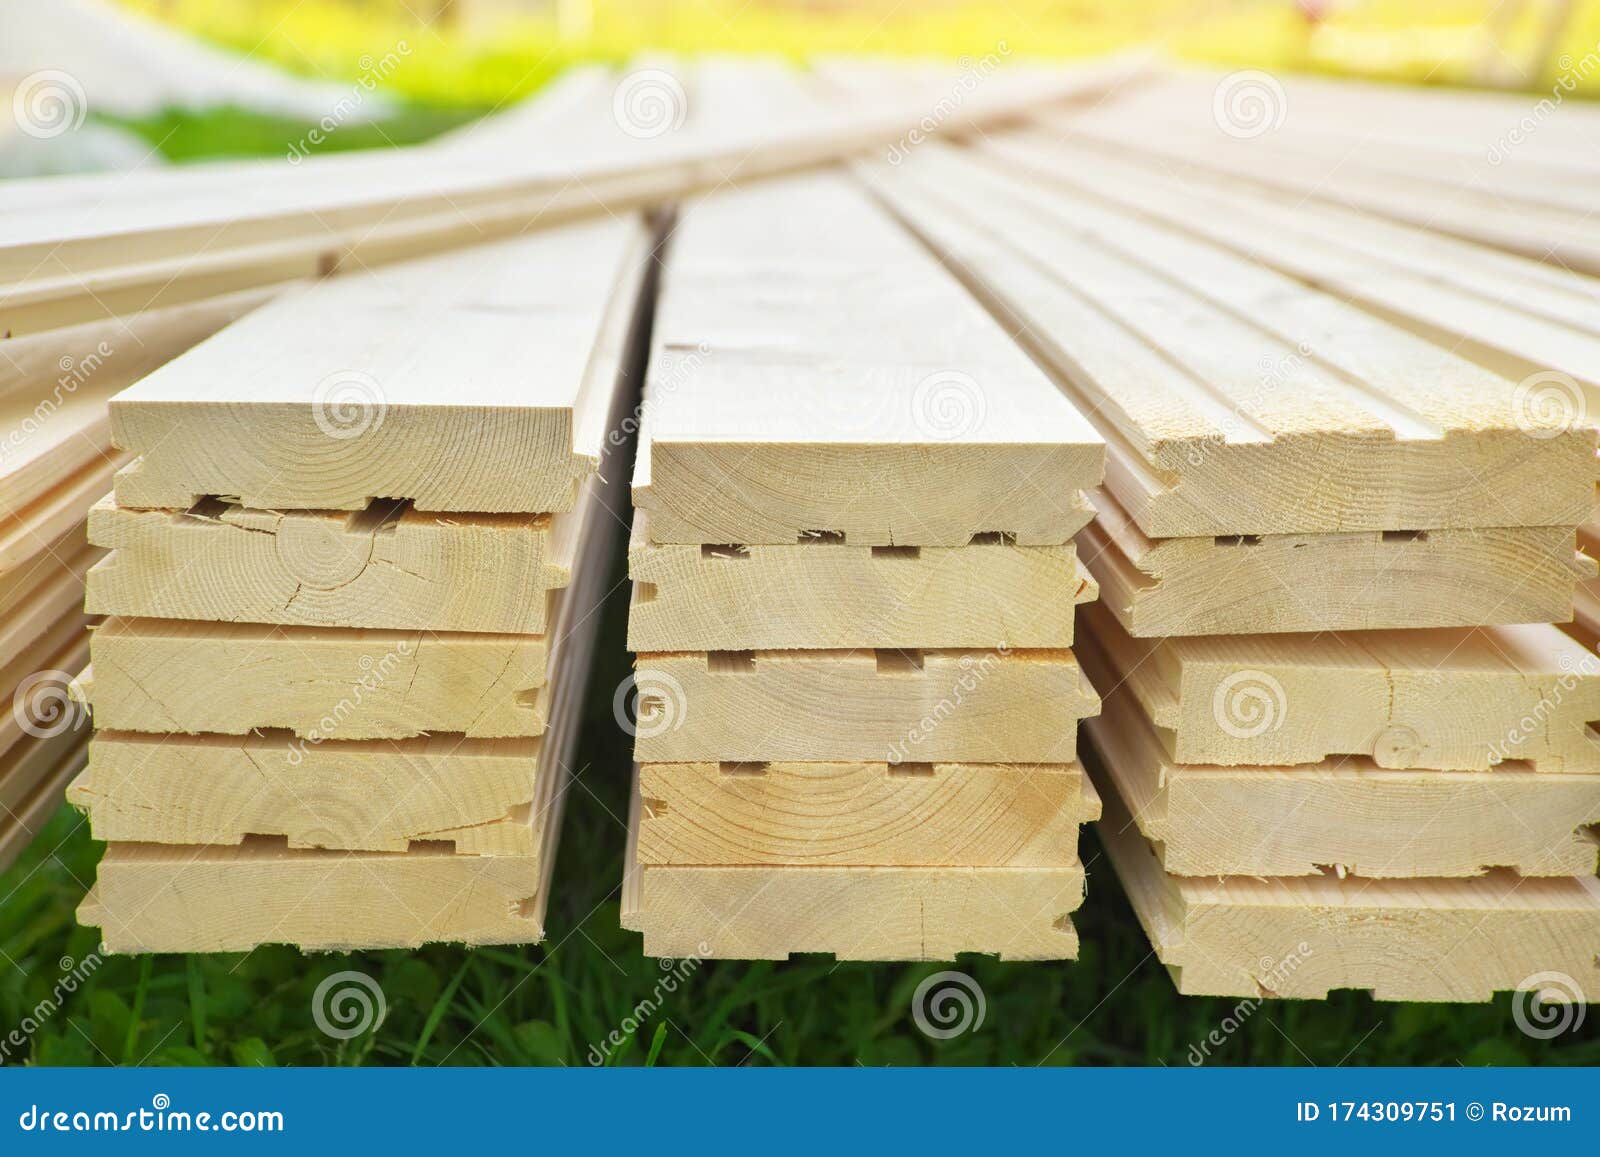 Tongue and Groove Pine Boards Stock Image - Image of groove, batten:  174309751